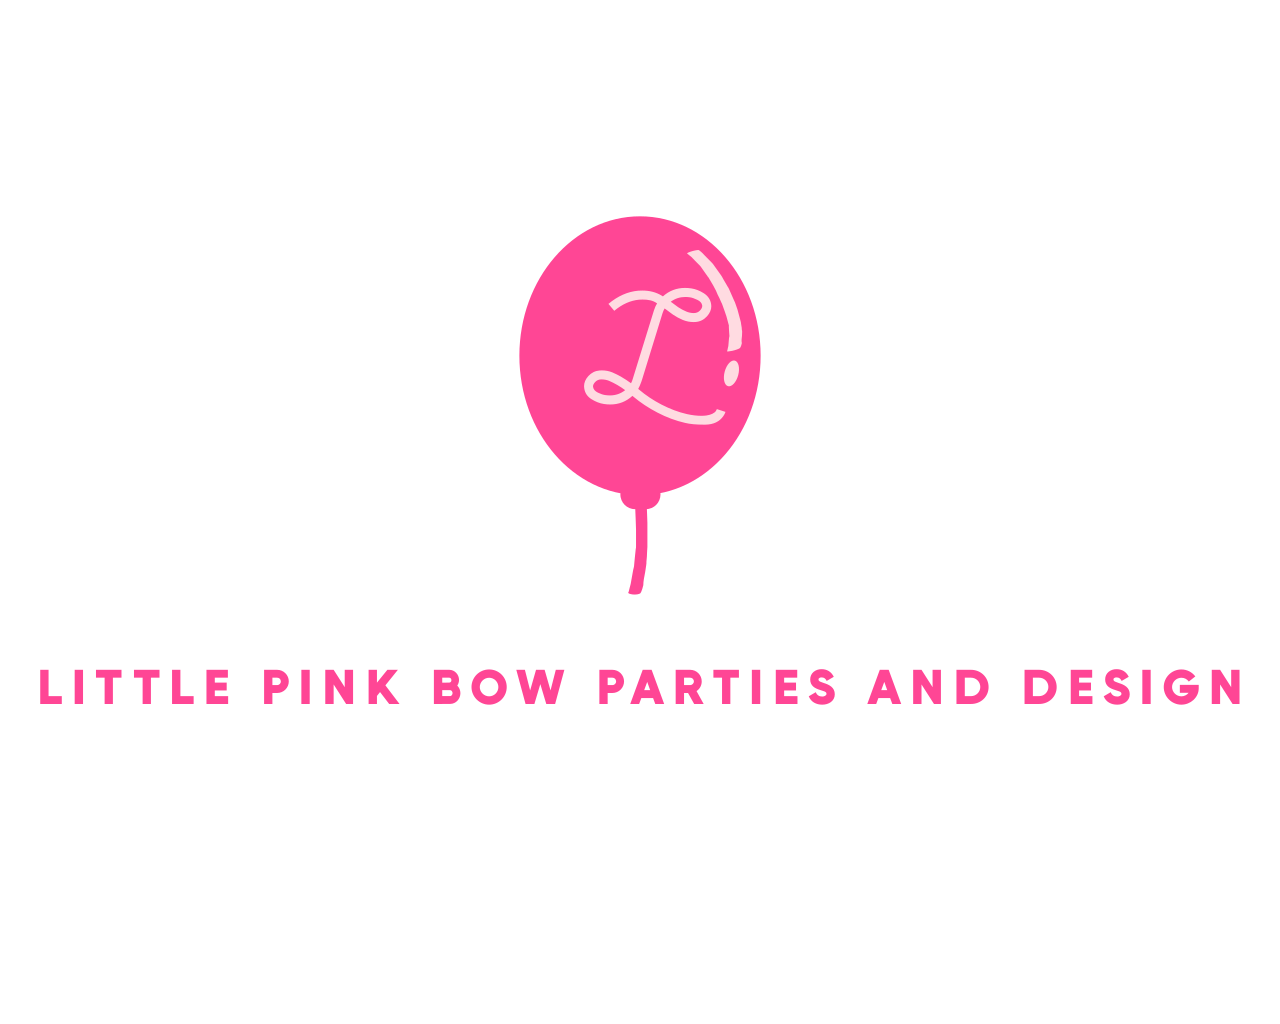 Little Pink Bow Parties